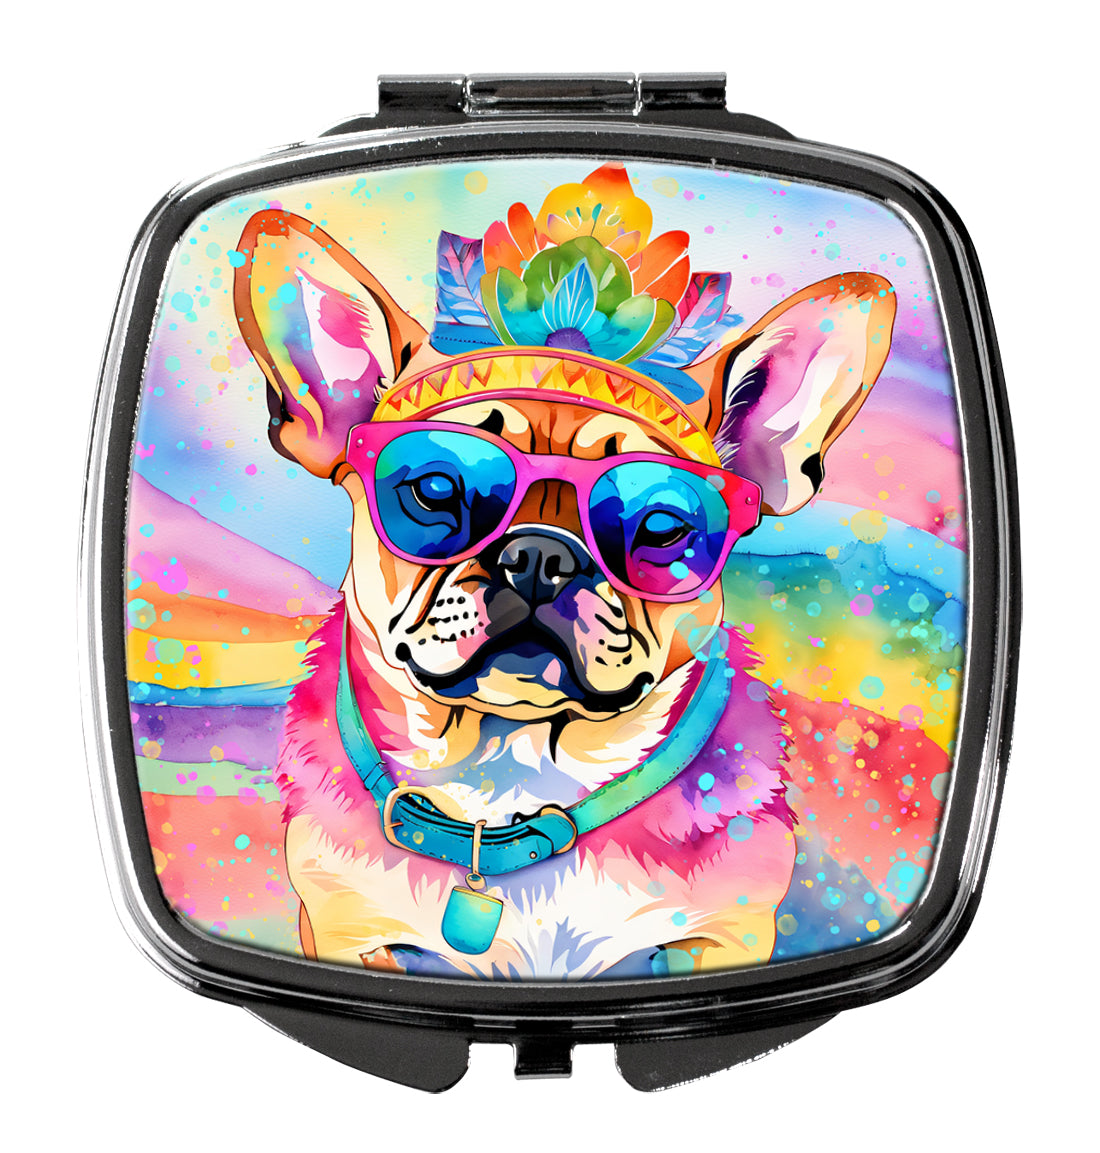 Buy this Pug Hippie Dawg Compact Mirror